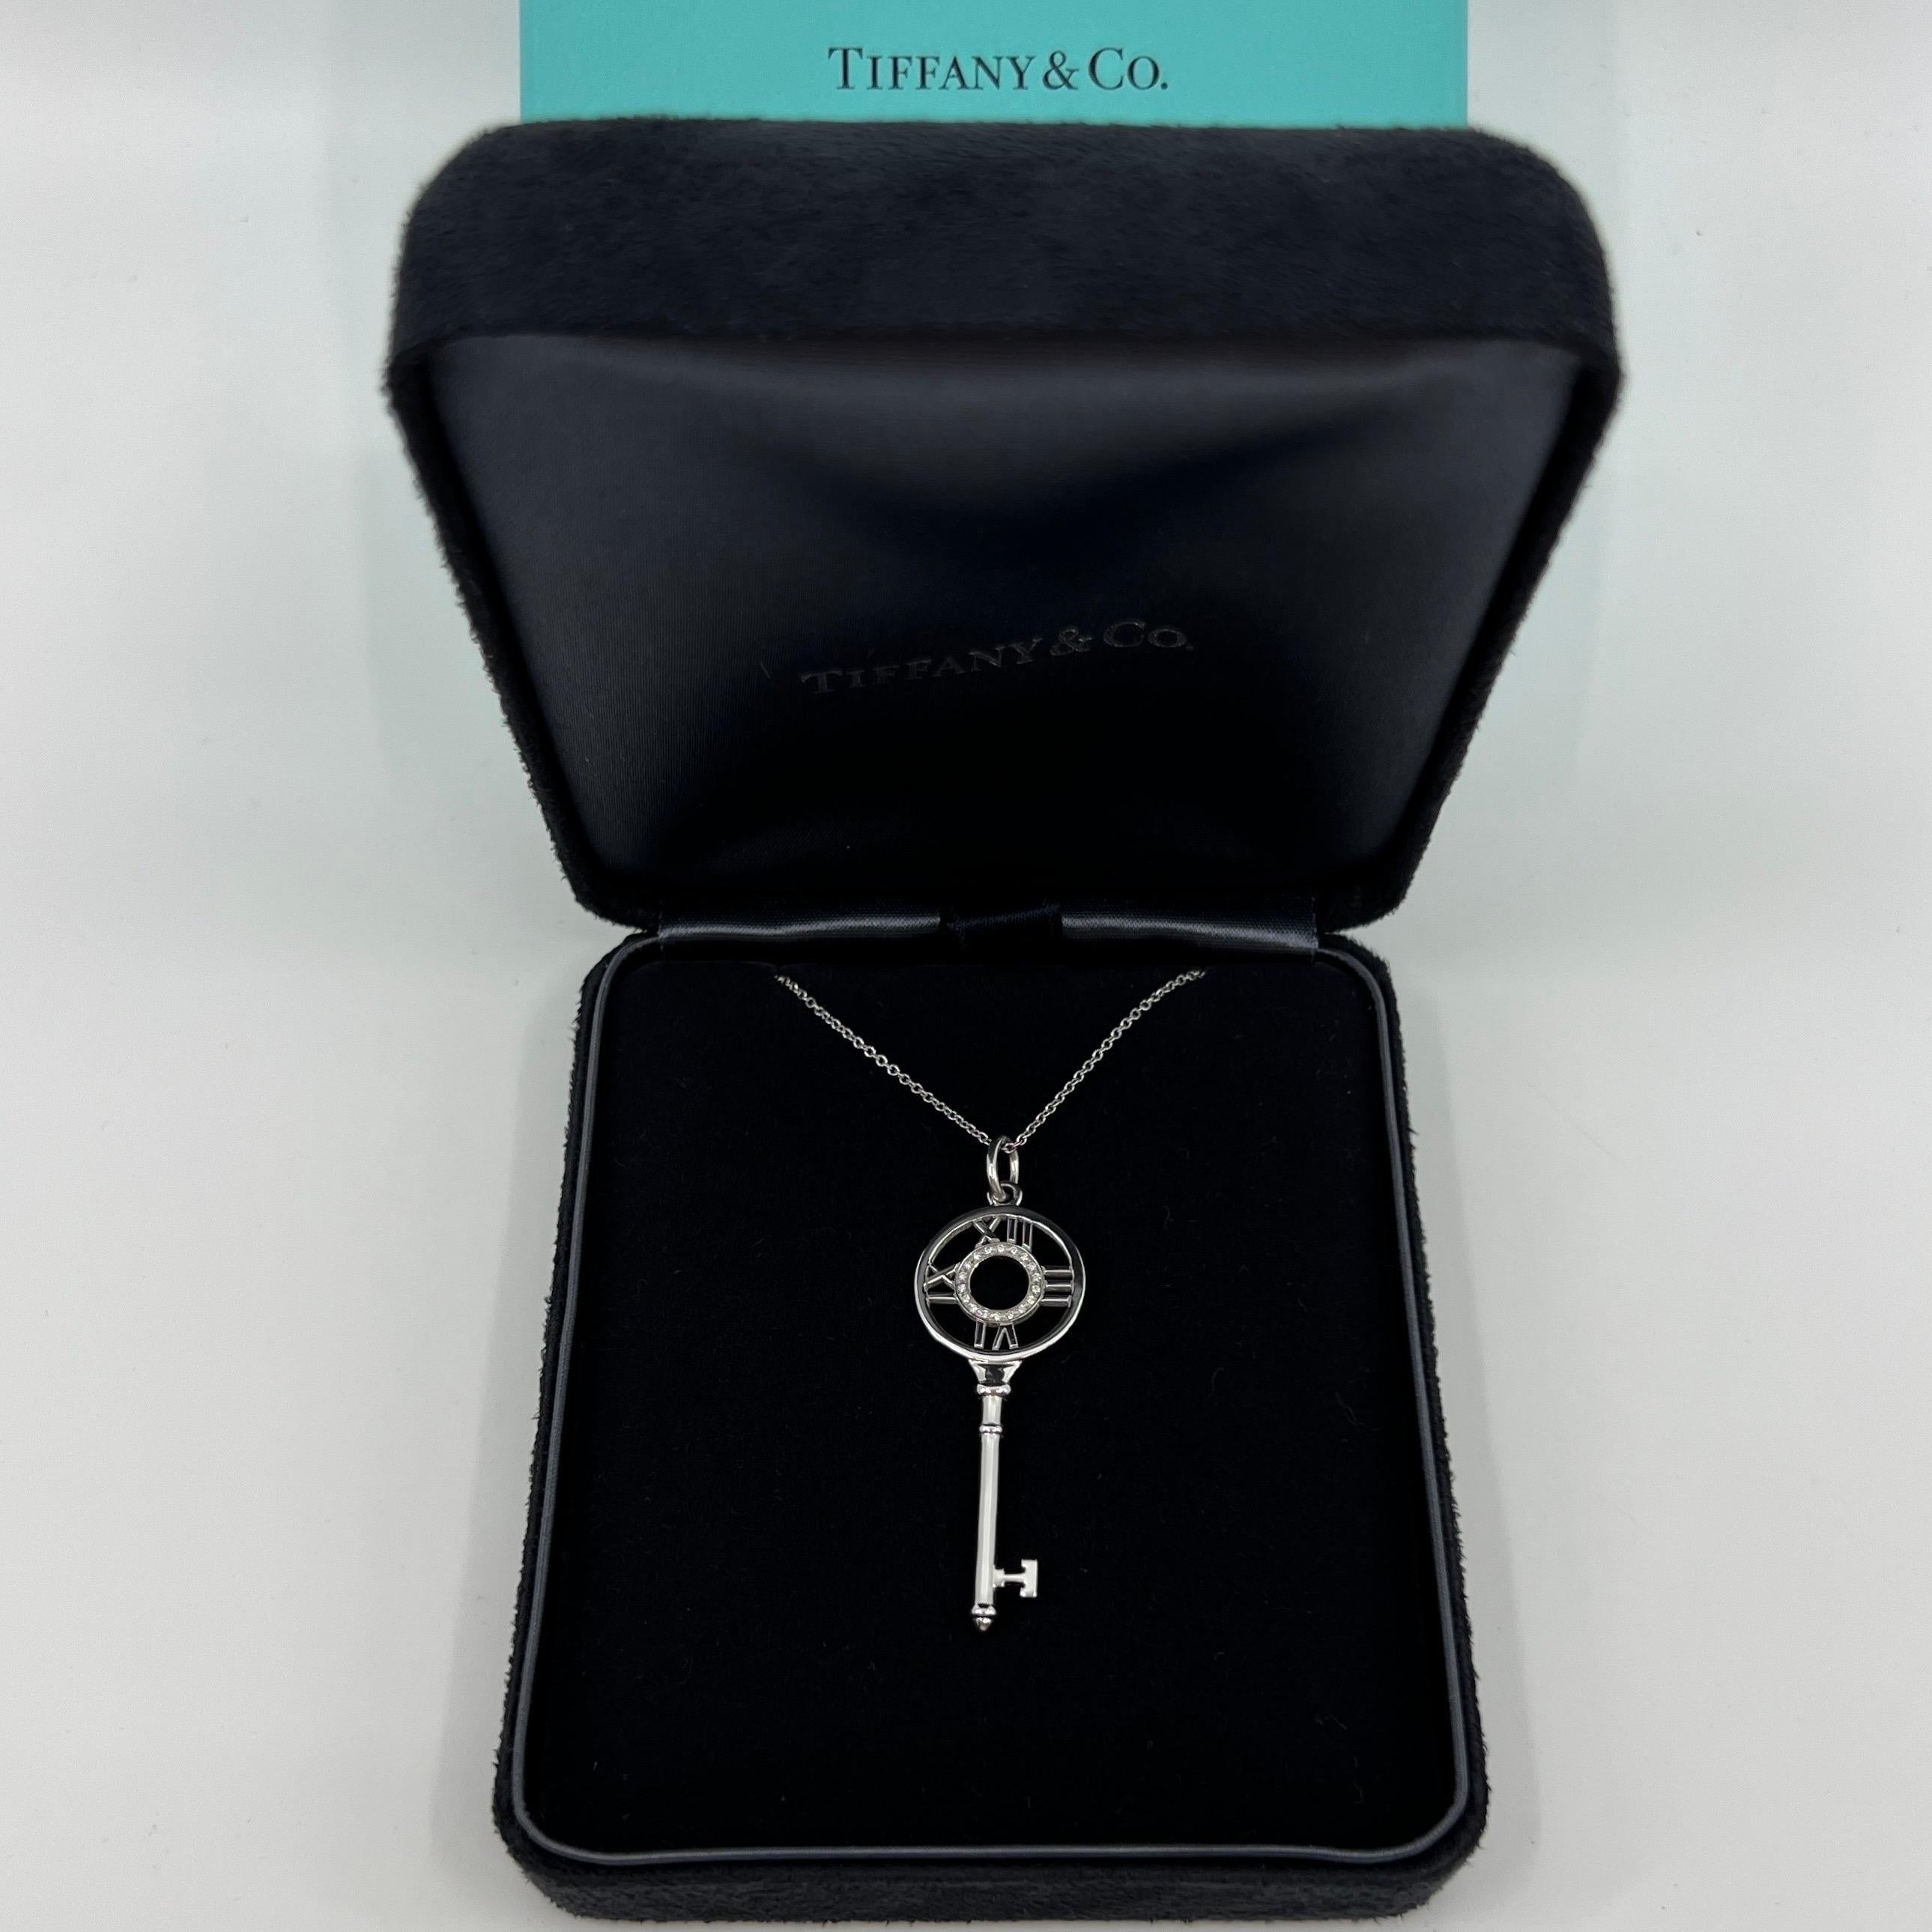 Tiffany & Co. Atlas Diamond 18k White Gold 1.6 Inch Key Pendant Necklace.

A beautiful and rare authentic Tiffany Key pendant from the Atlas range. Tiffany keys are 'radiant symbols of a bright future, representing brilliant beacons of optimism and